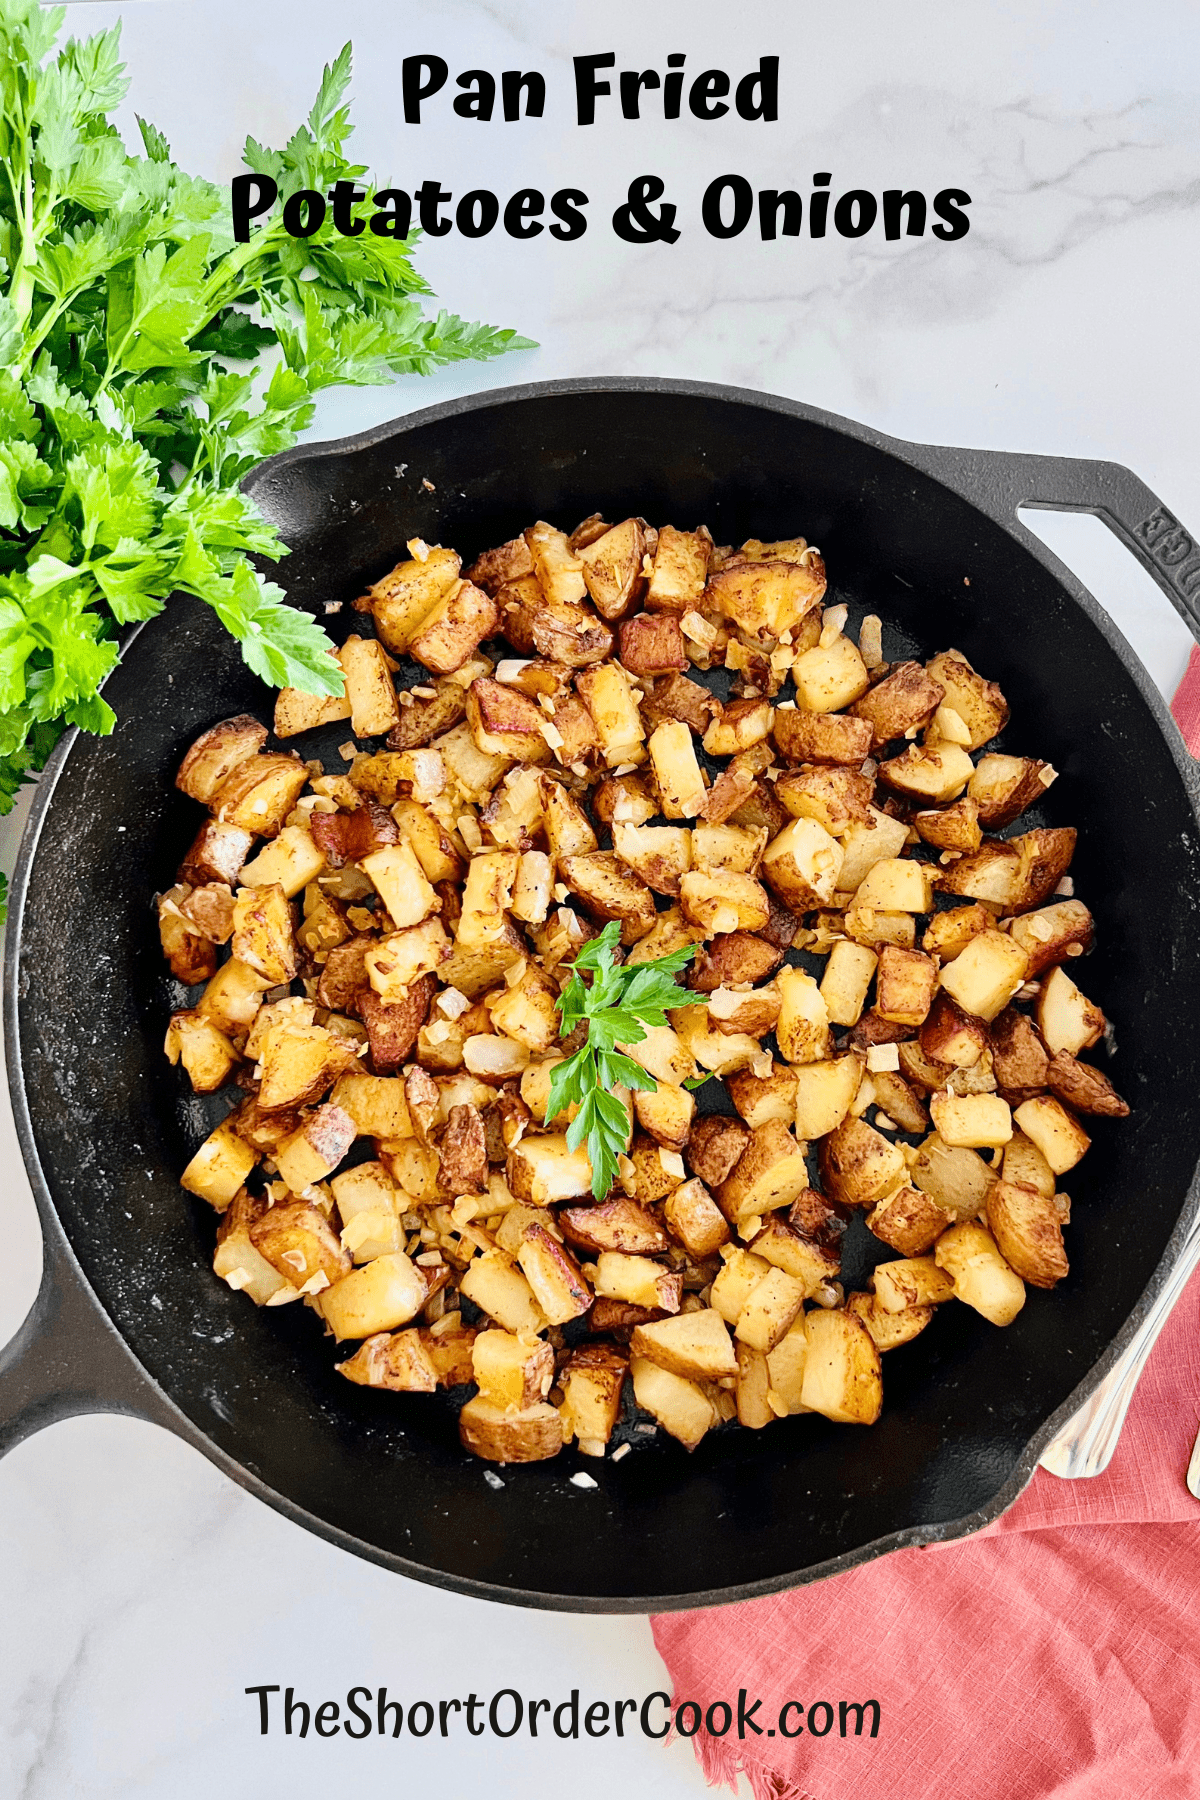 Pan Fried Potatoes & Onions in a skillet on the counter with fresh parsley and linen napkin.